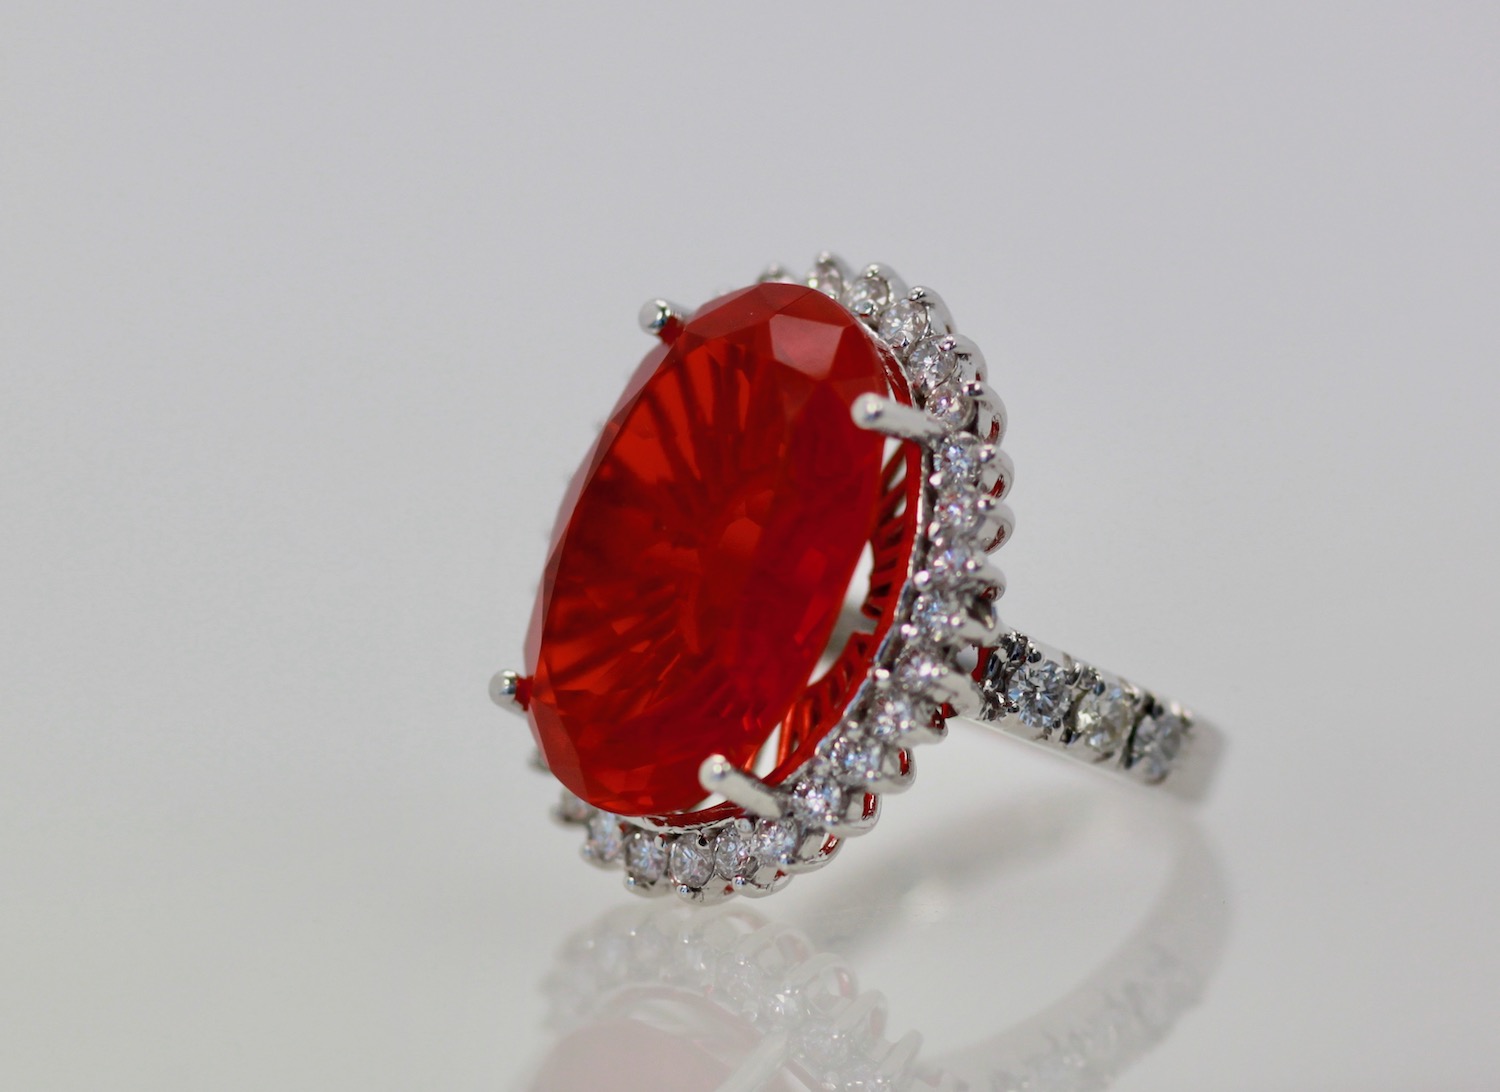 Large Fire Opal ring with Diamond surround – angle